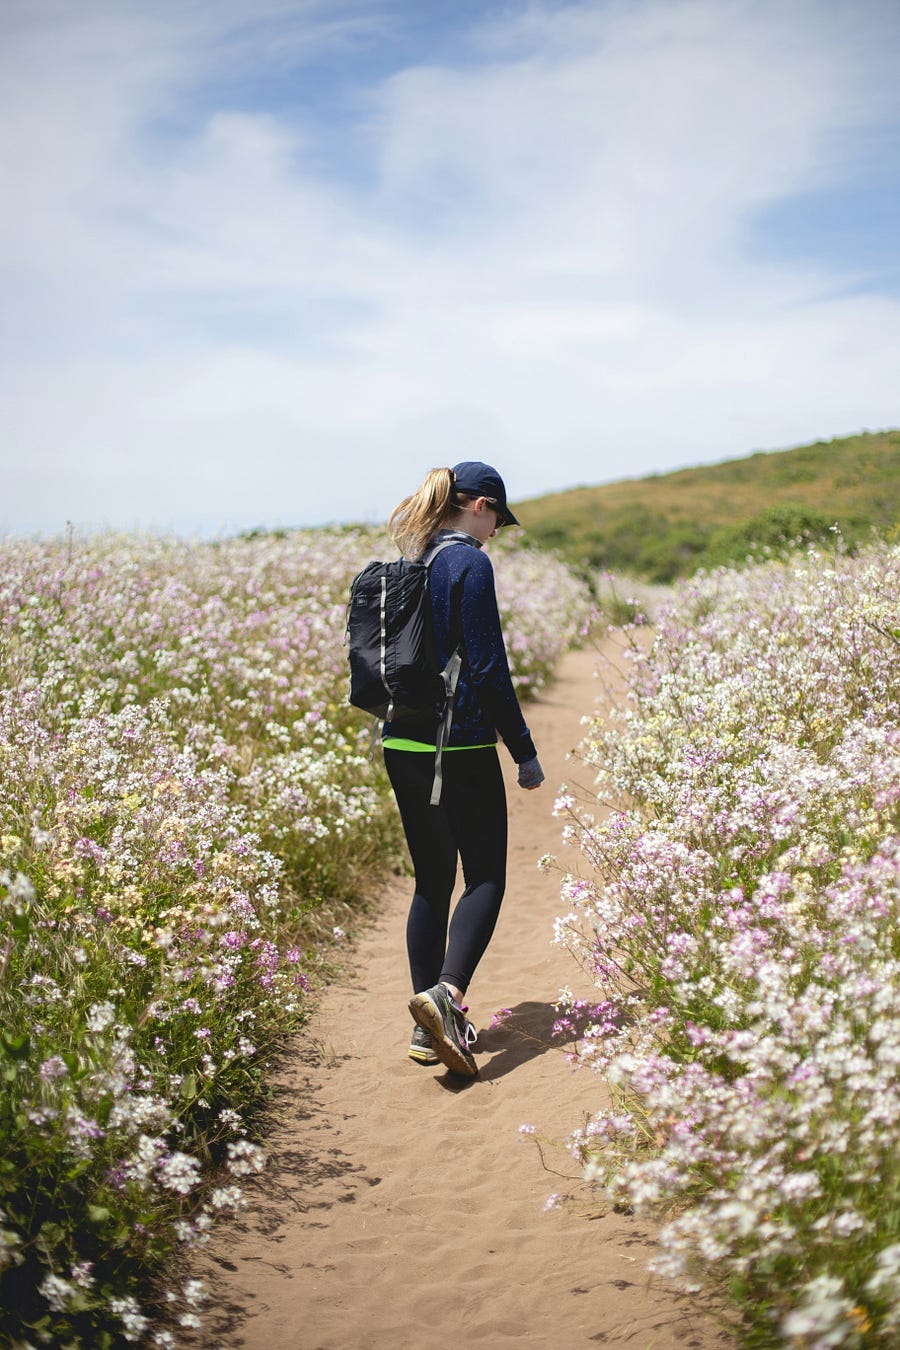 Woman walking a pathway through flowers on either side.